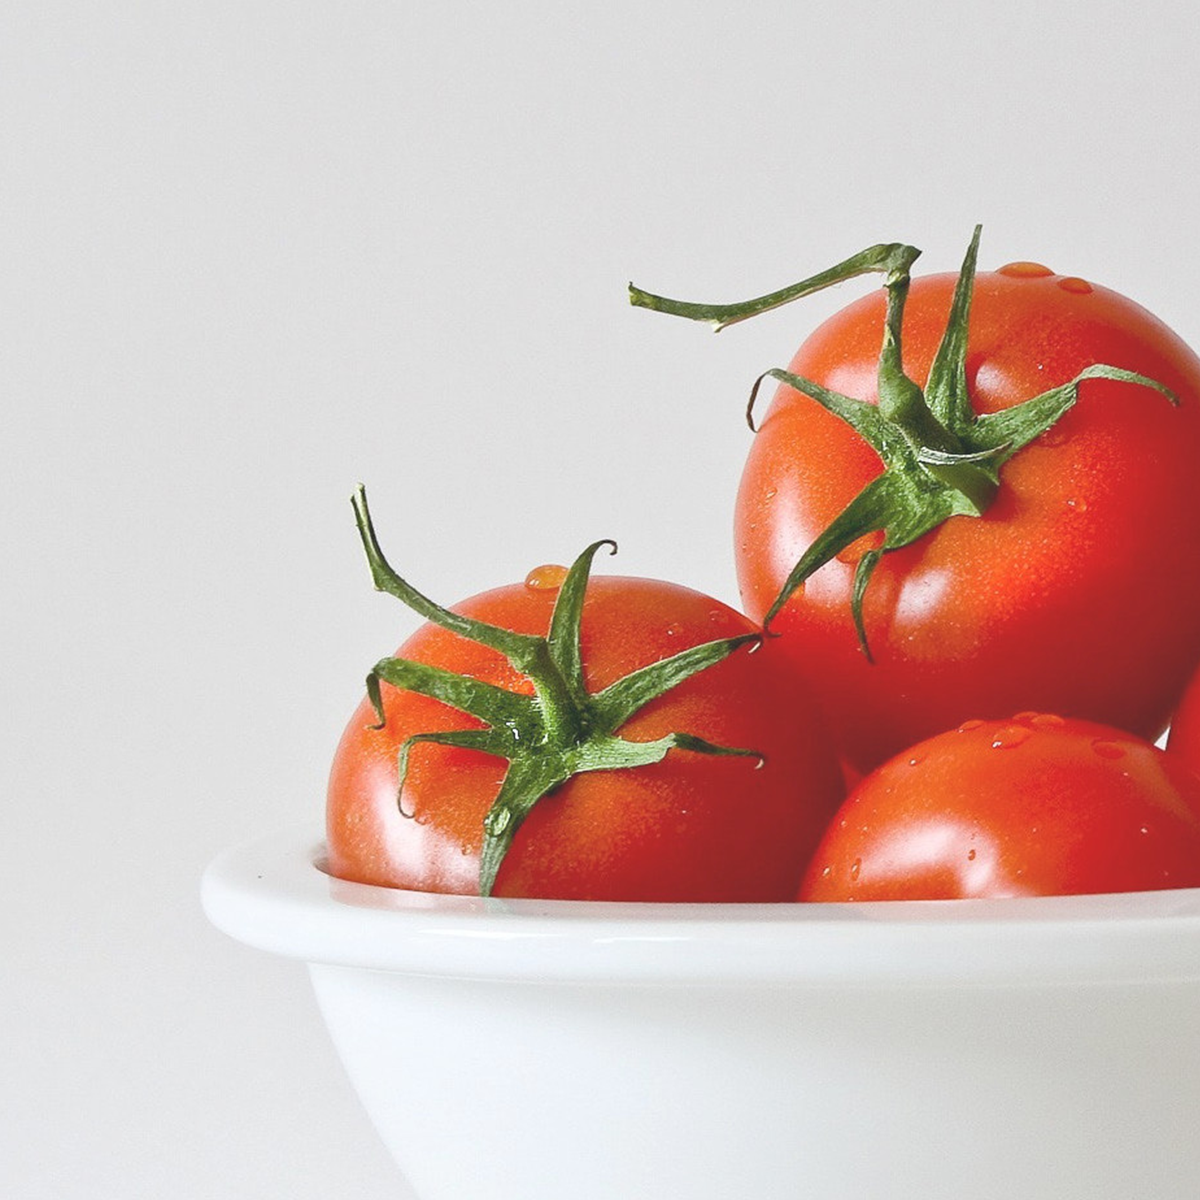 The Pomodoro Technique: How to Do More in Less Time